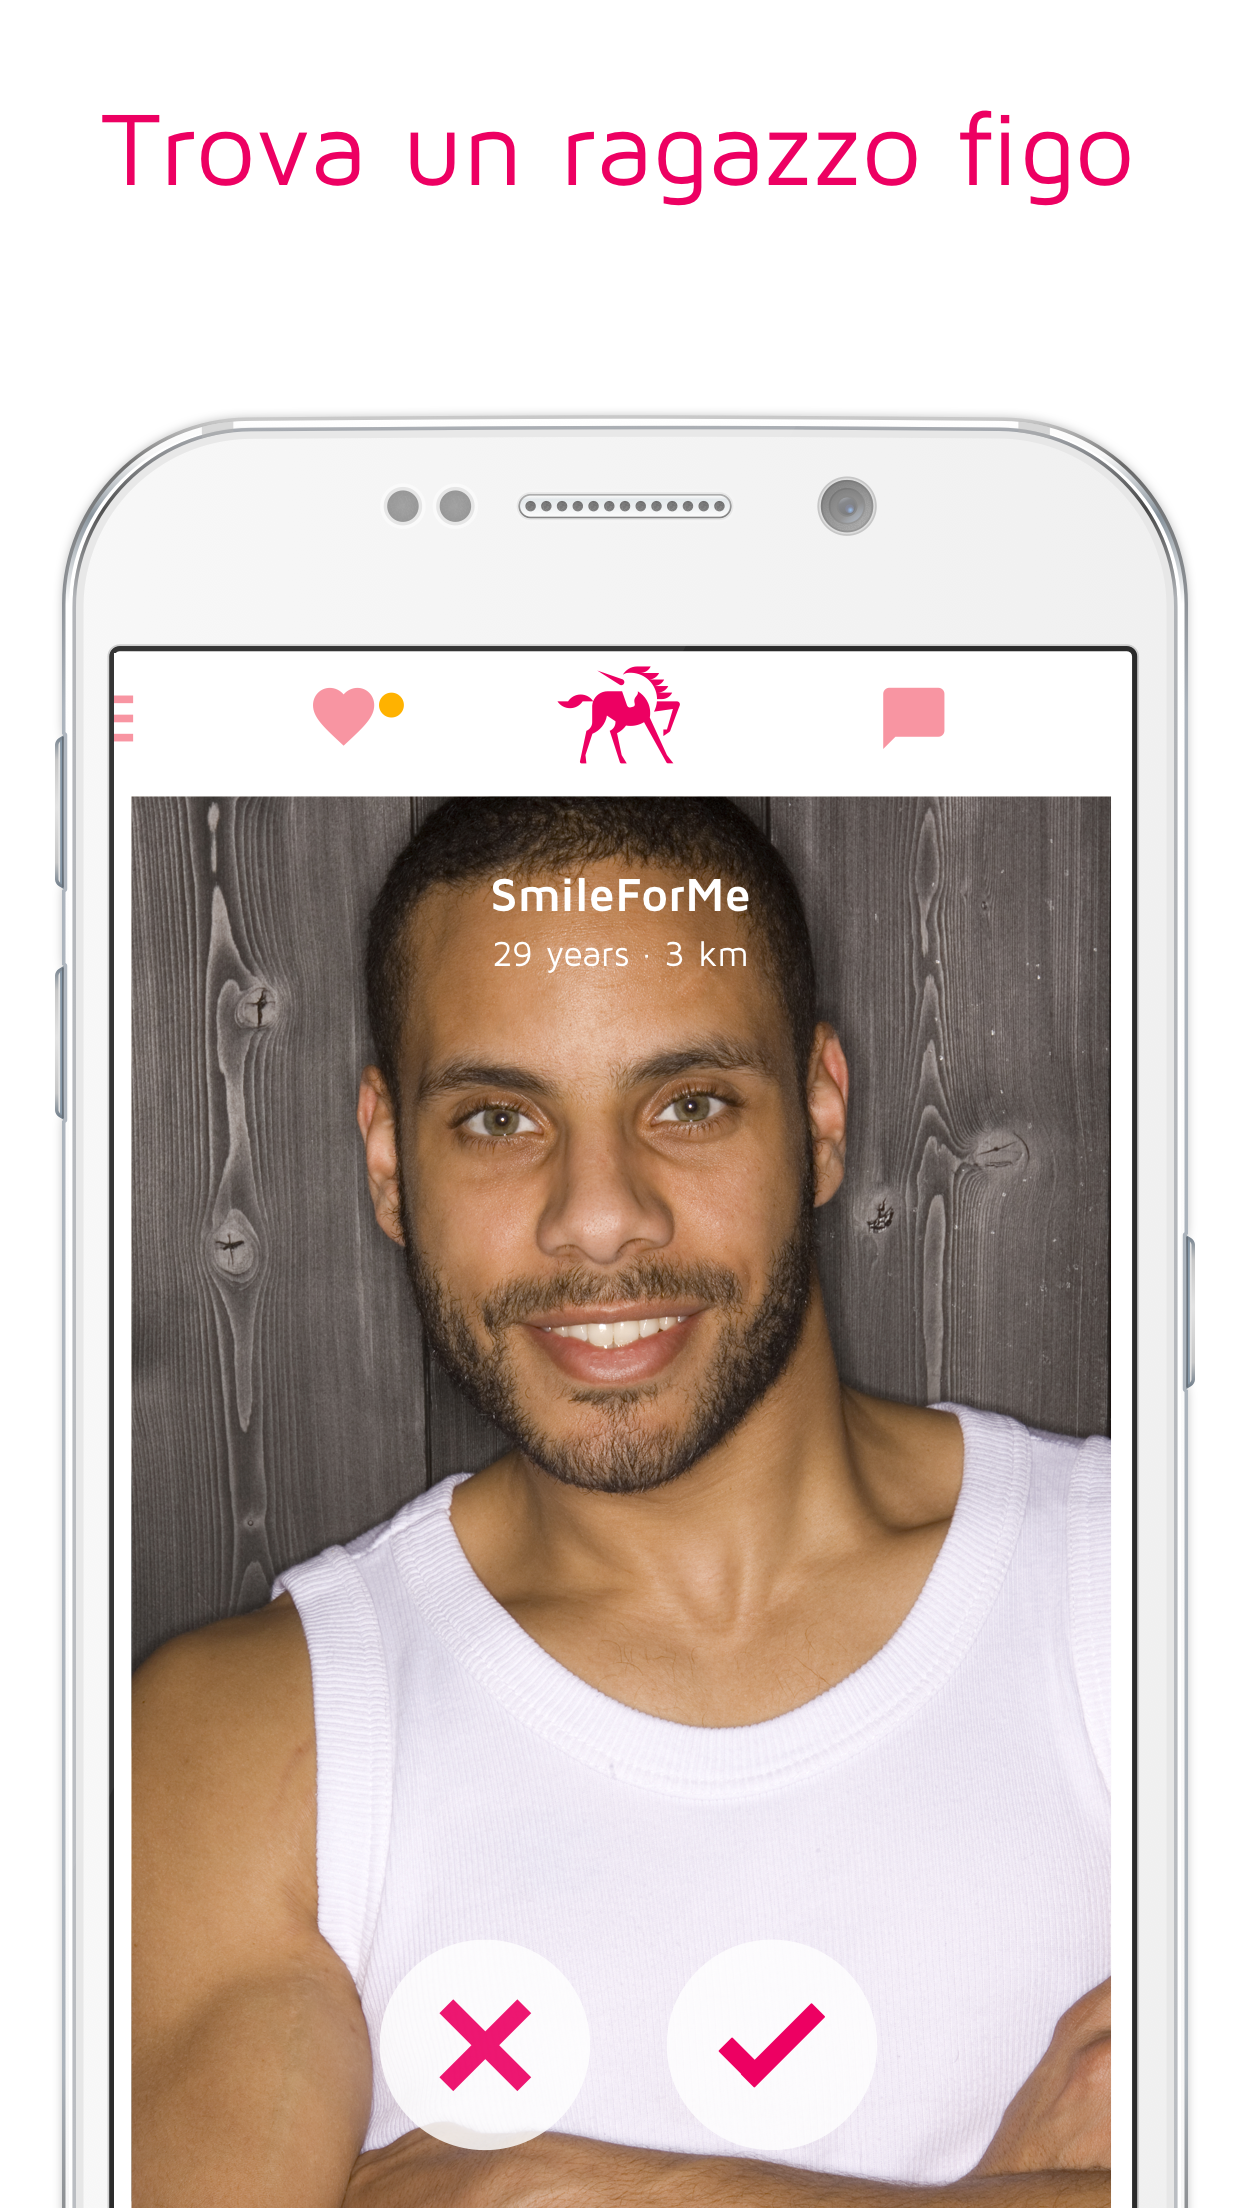 Android application Lovely – Meet and Date Locals screenshort